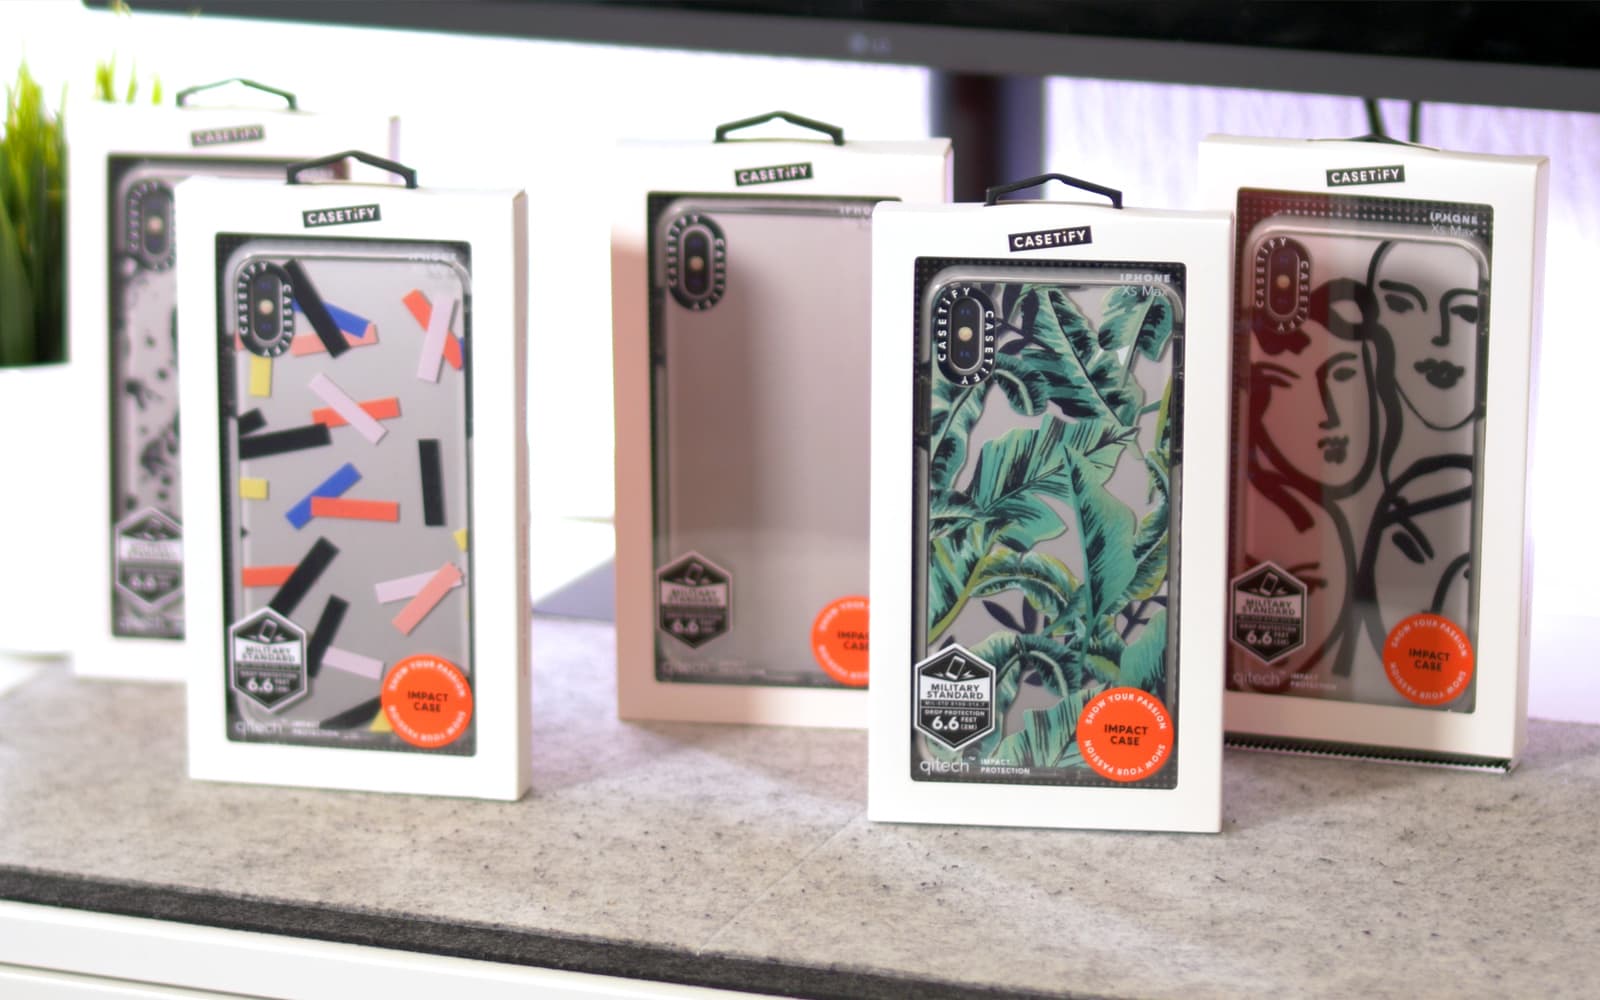 There's a Casetify iPhone case to match your personal style.